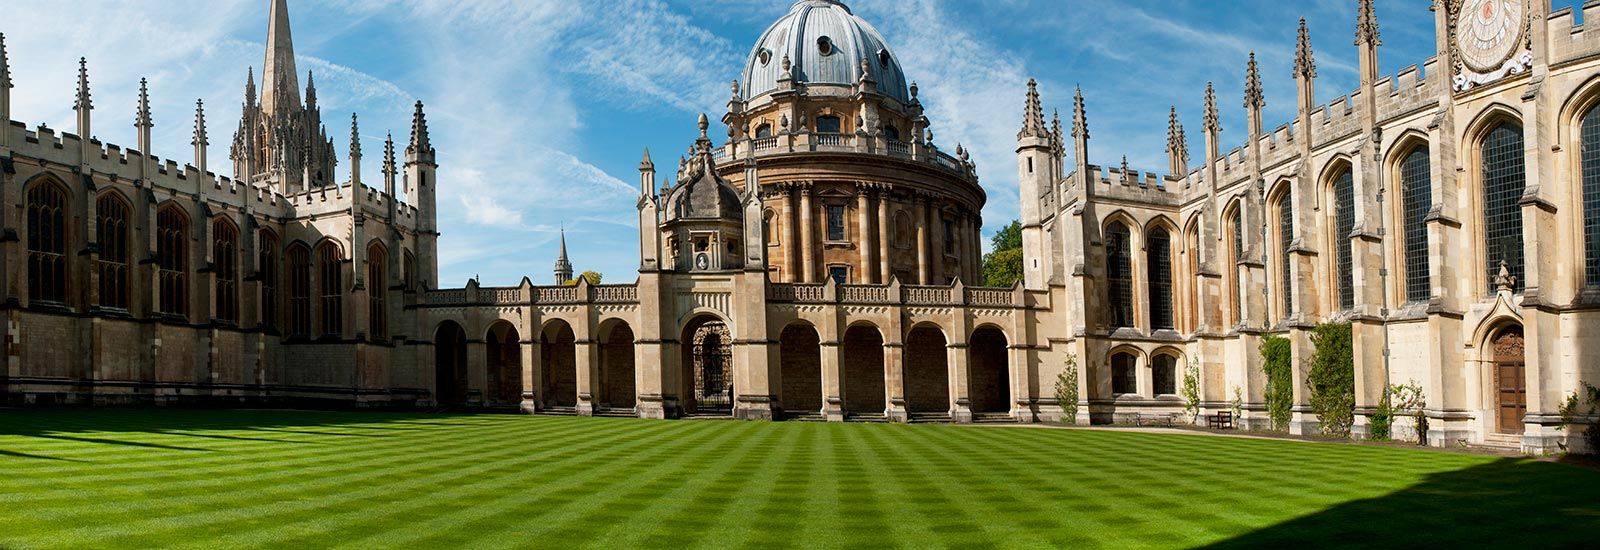 Oxford Scholarships: A Golden Opportunity For International Students